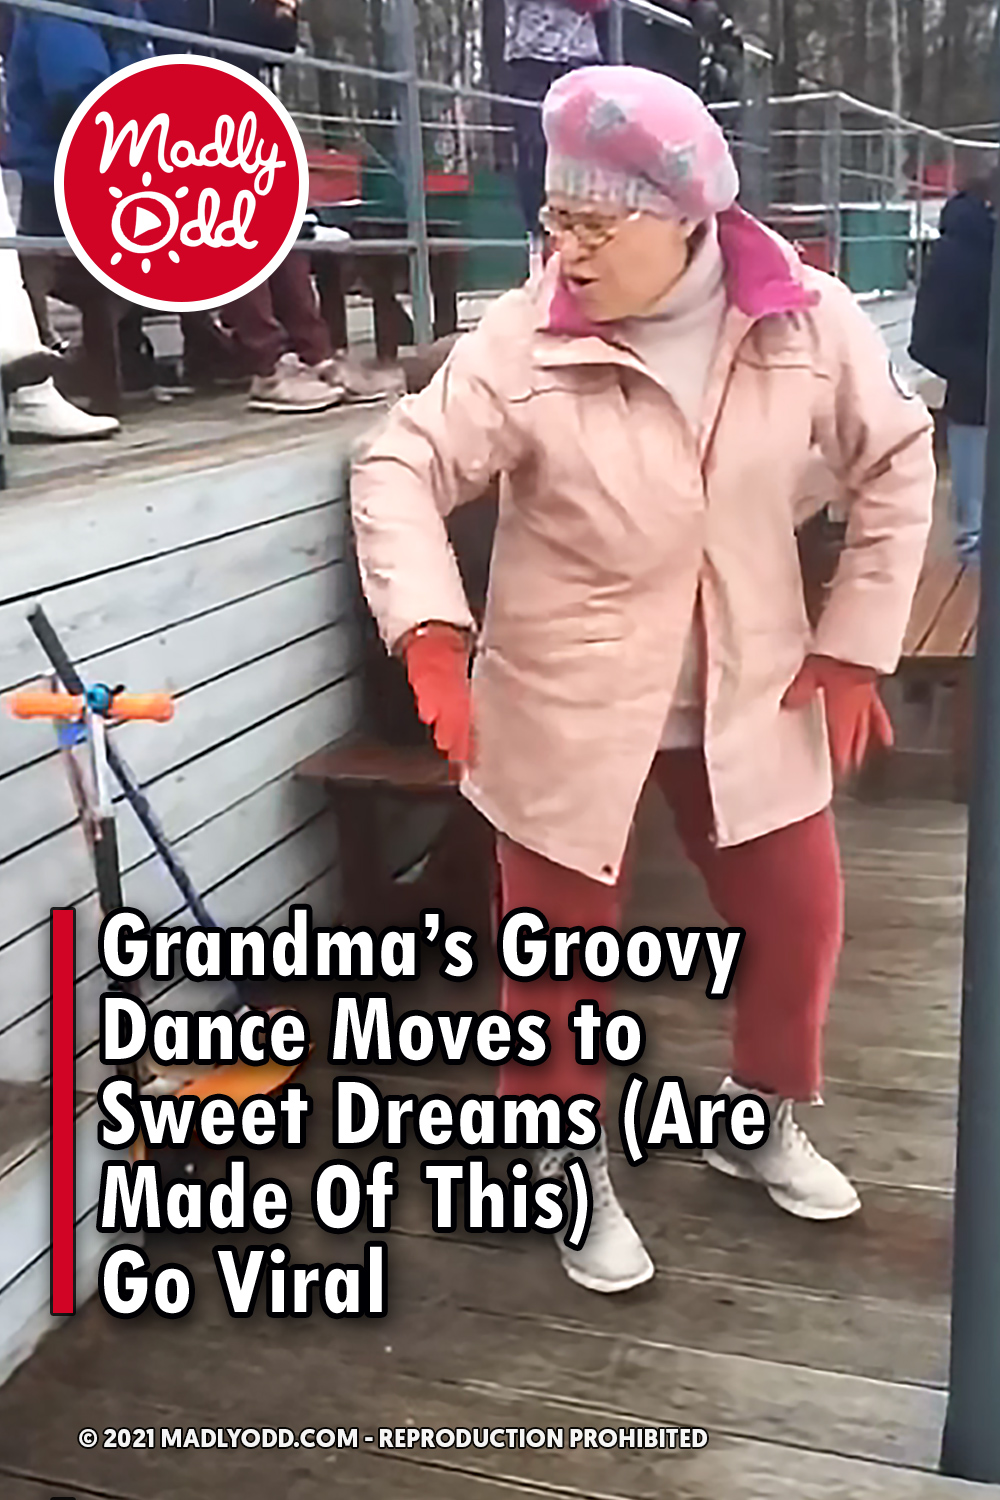 Grandma’s Groovy Dance Moves to Sweet Dreams (Are Made Of This) Go Viral